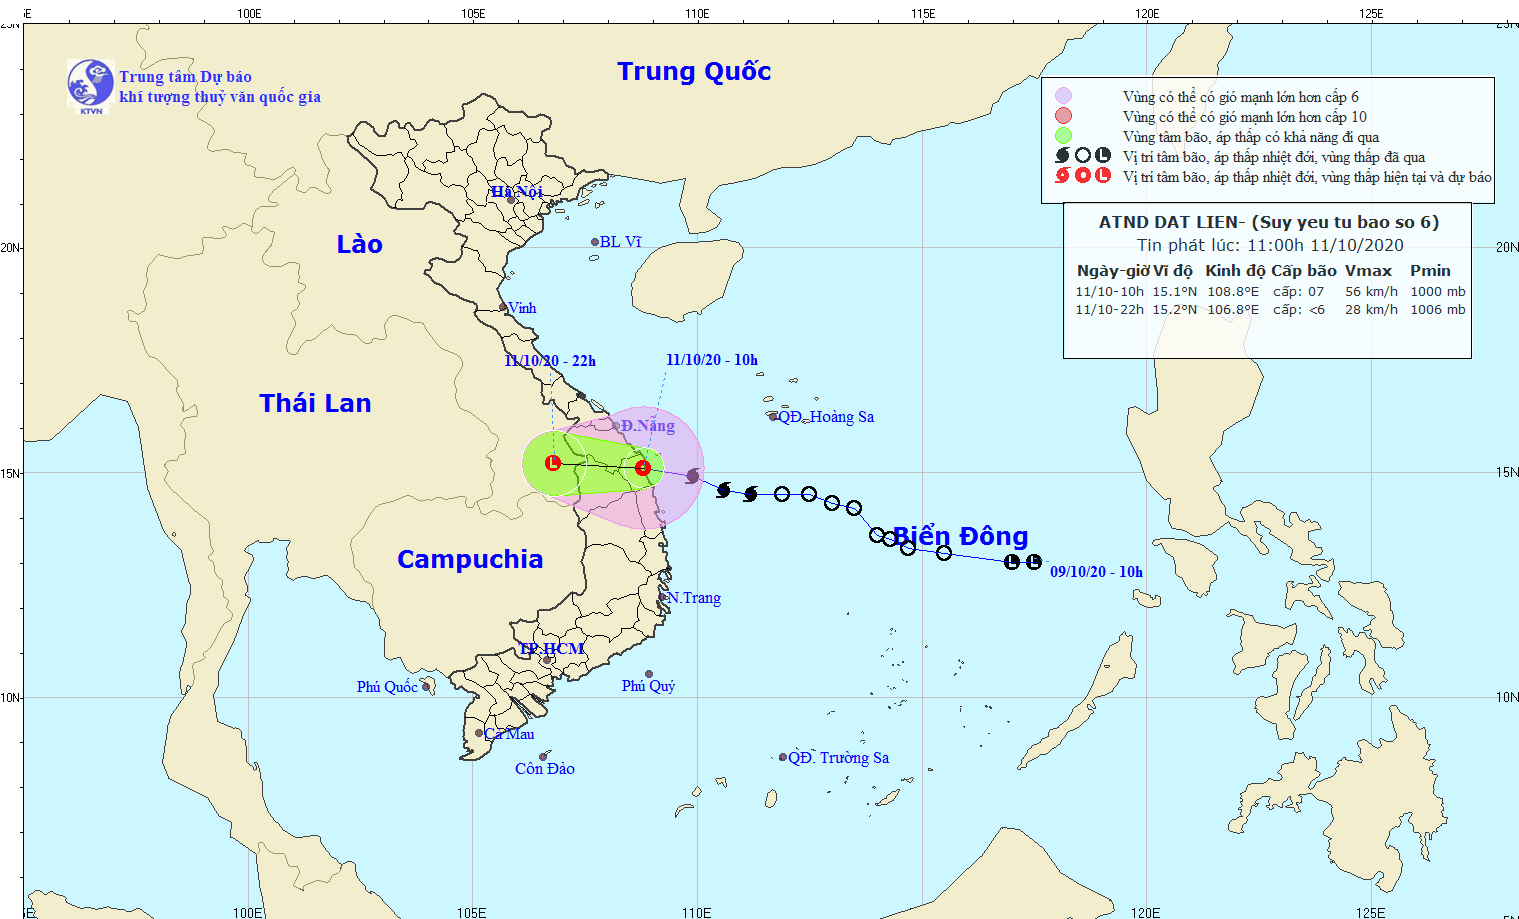 Storm Linfa makes landfall in the Central provinces of Vietnam this morning.